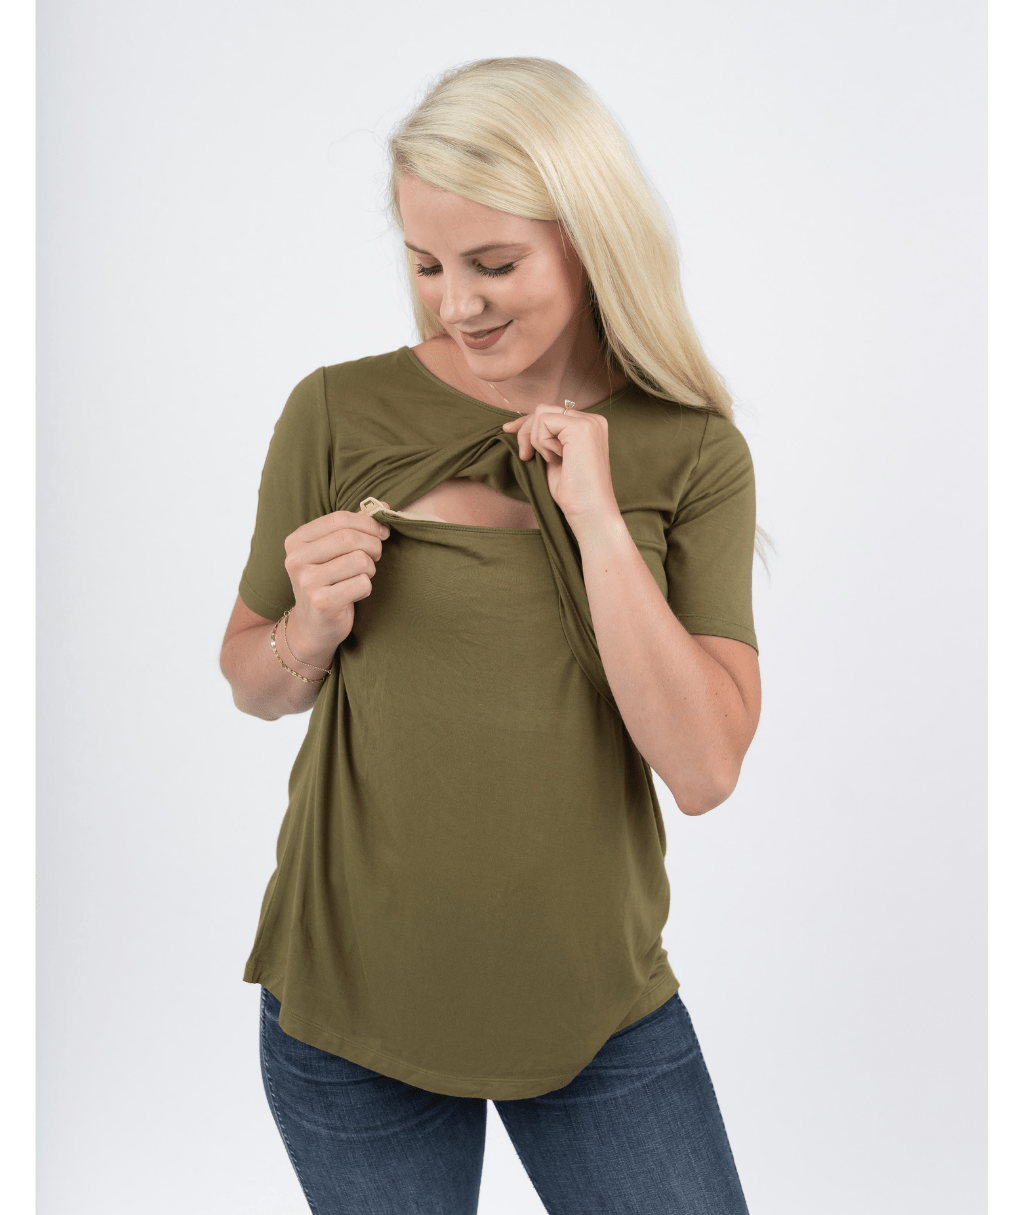 Olive Short Sleeve Nursing Shirt from Undercover Mama - Perfect for Pregnancy and Breastfeeding